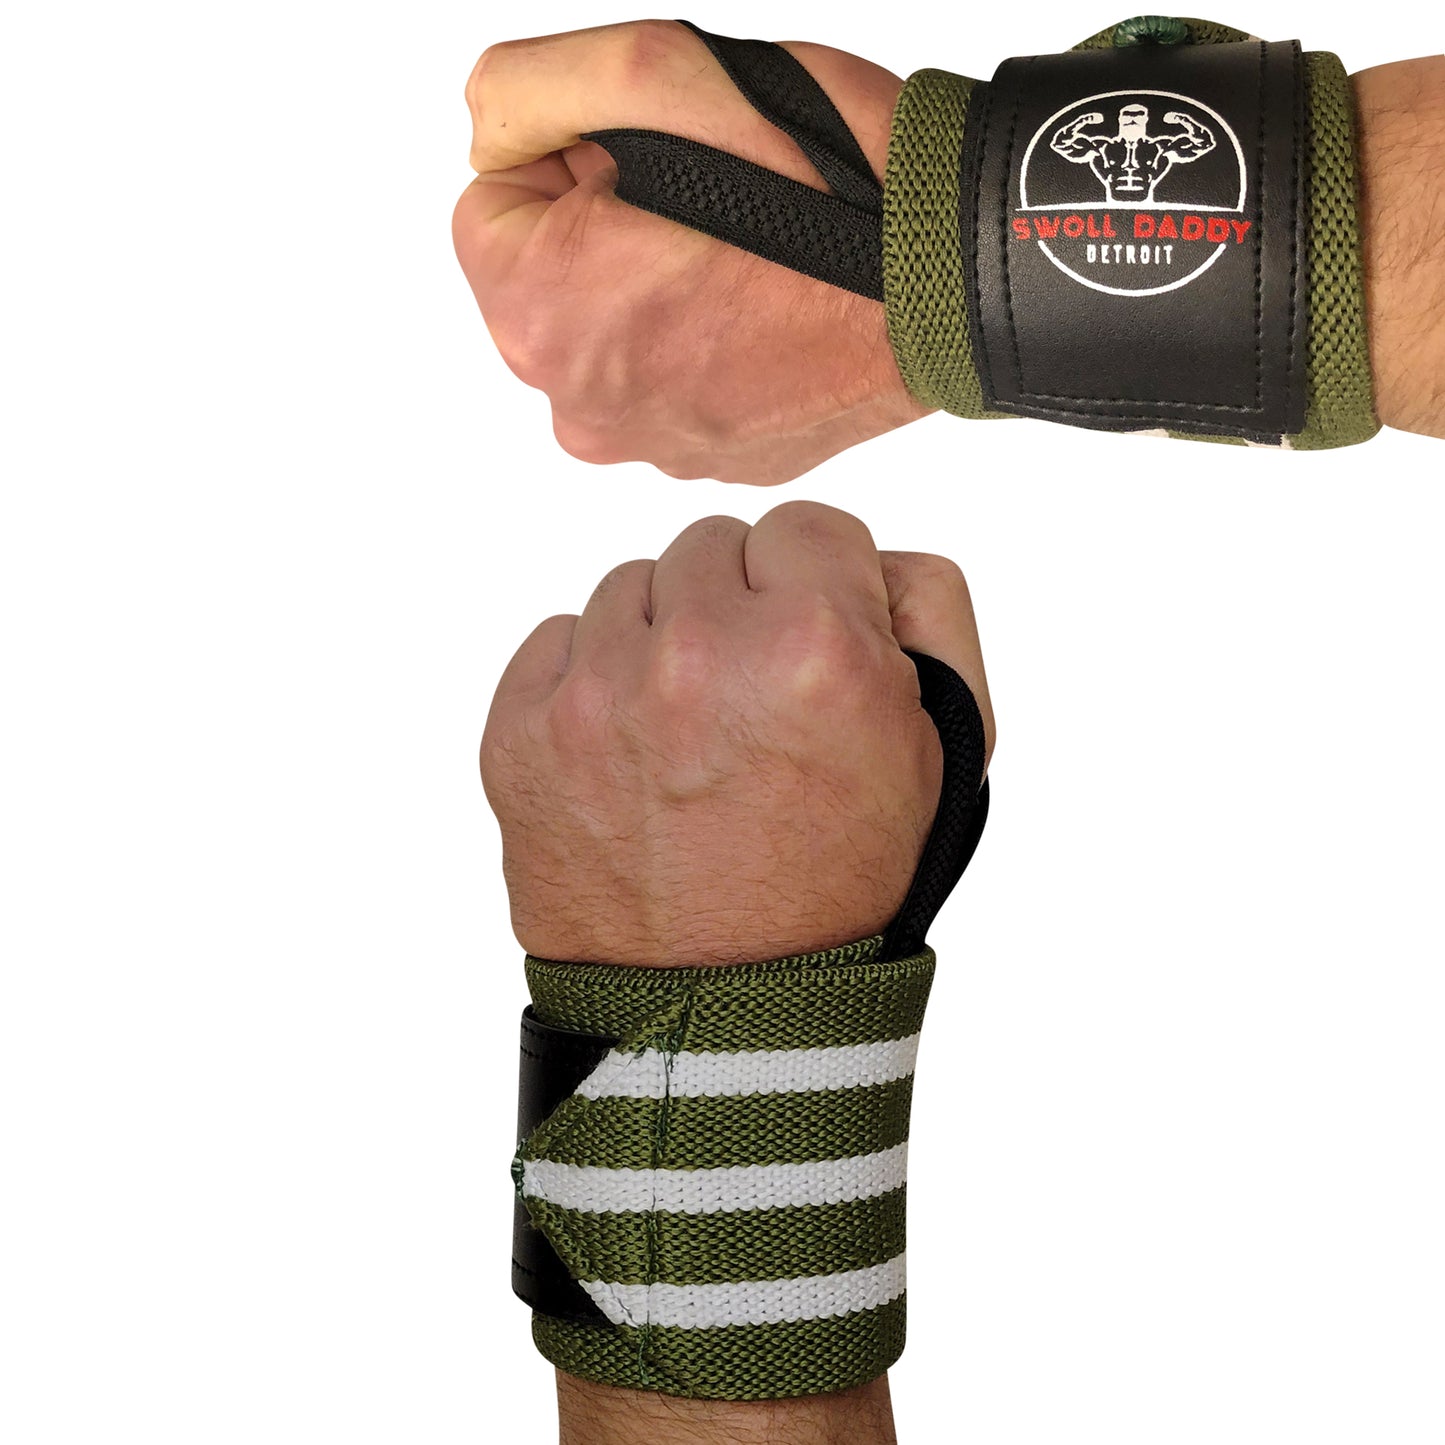 Swoll Daddy Wrist Wraps - 18" Premium Grade with Thumb Loops - Wrist Support Brace - Men & Women - Strength Training, Crossfit, Powerlifting, Weight Lifting